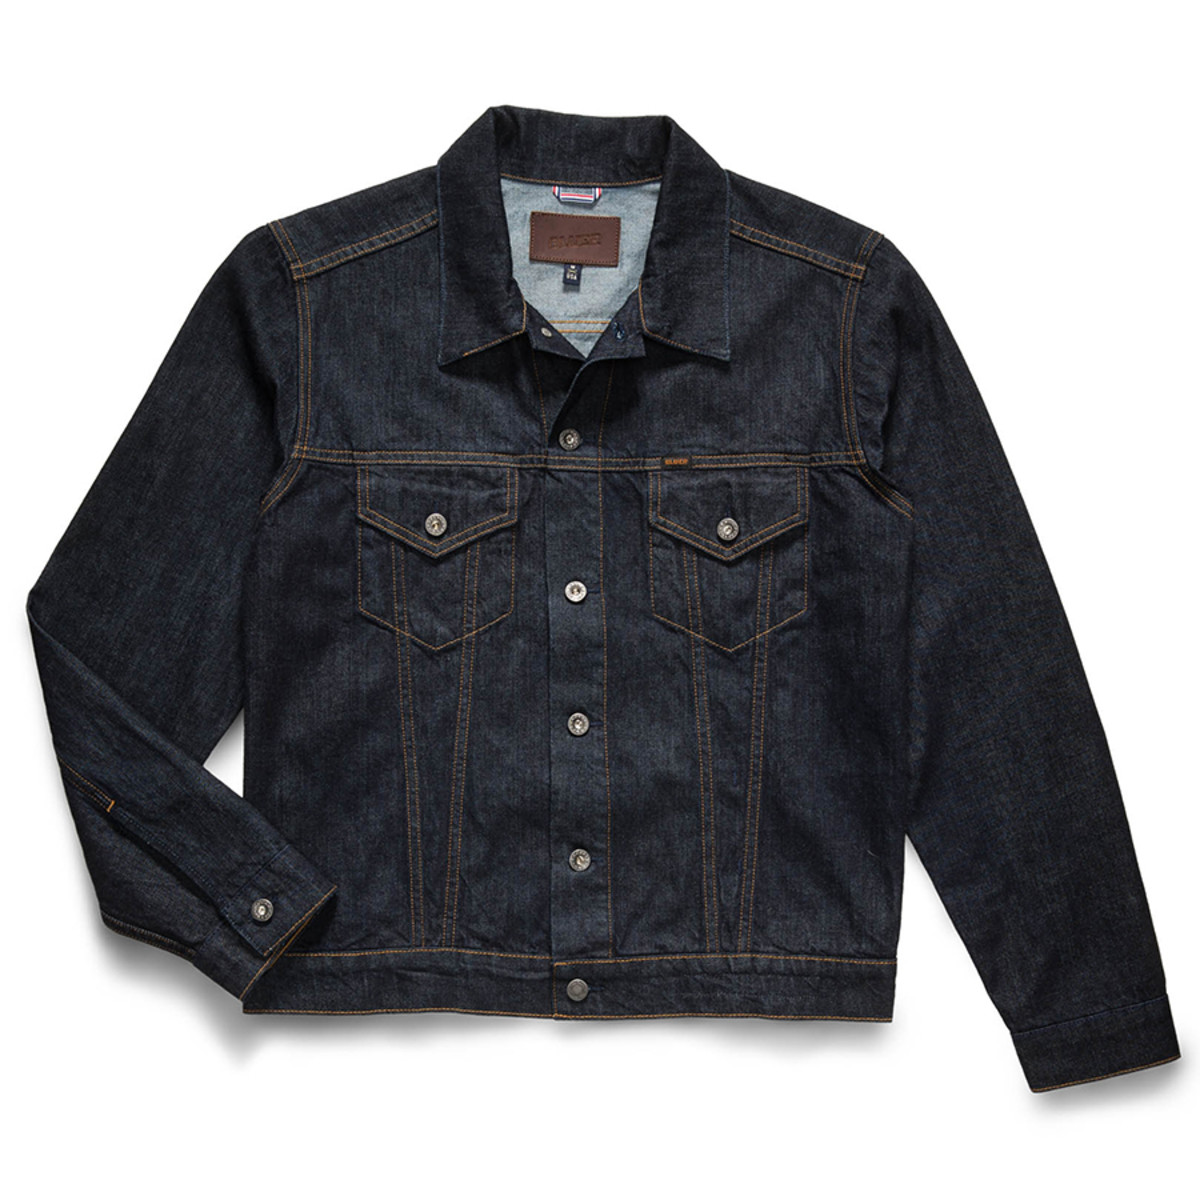 American-Made Denim Jackets From Levi's, Rag & Bone and More - Men's Journal